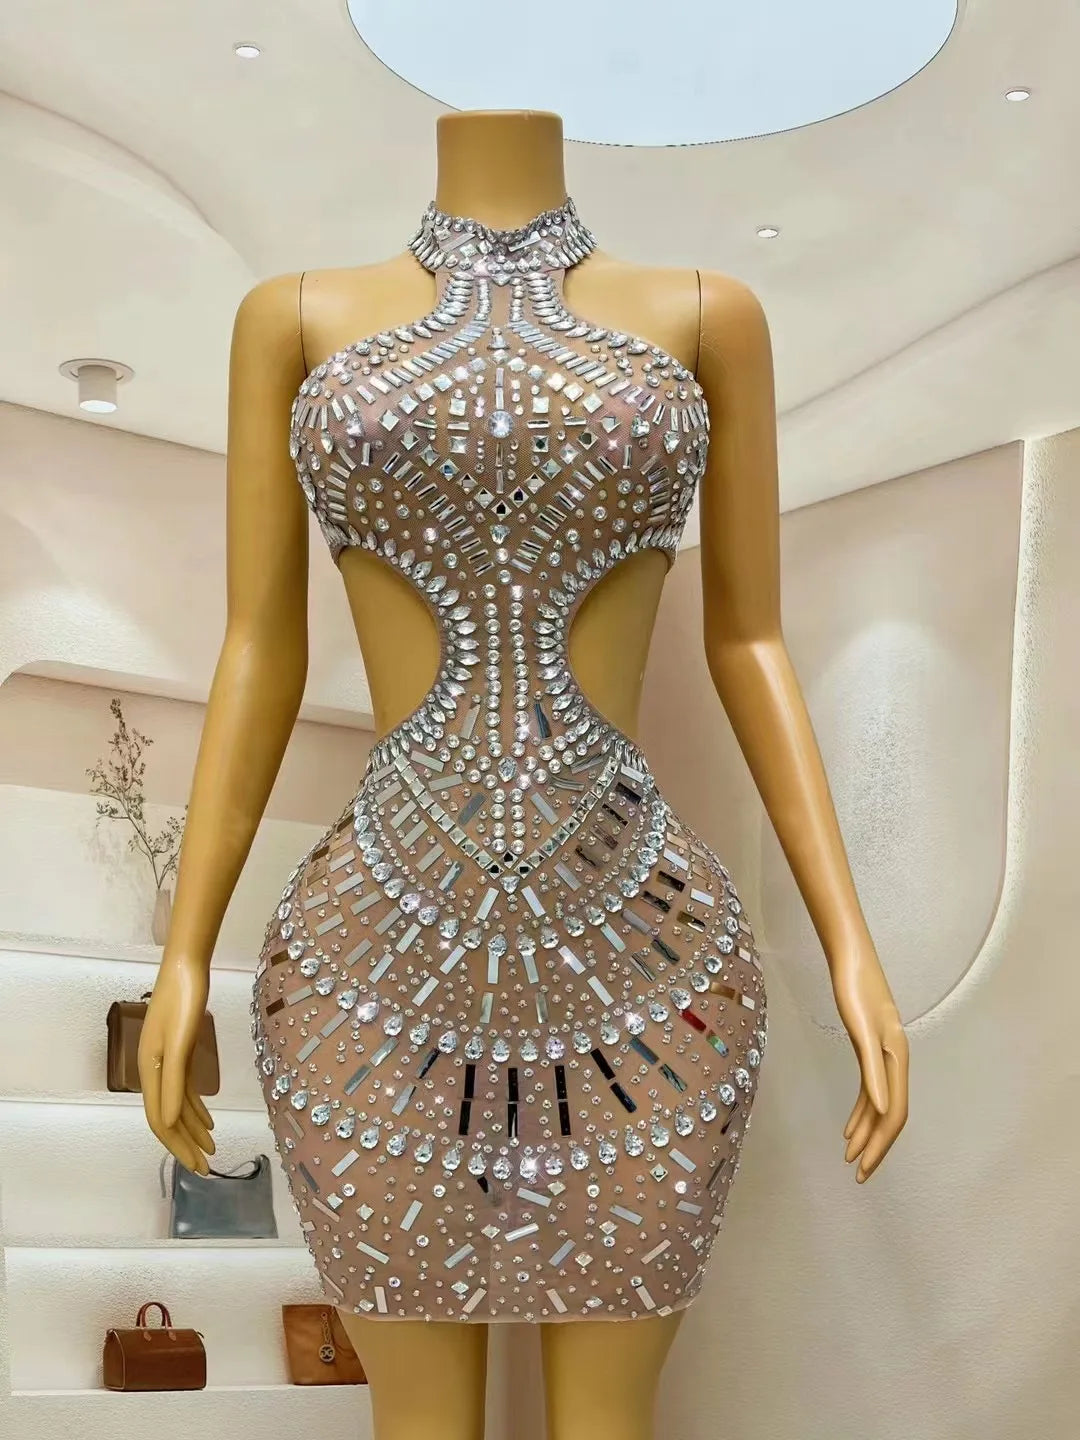 Silver Rhinestones Sequins Backless Hollow Dress Outfit Performance Costume